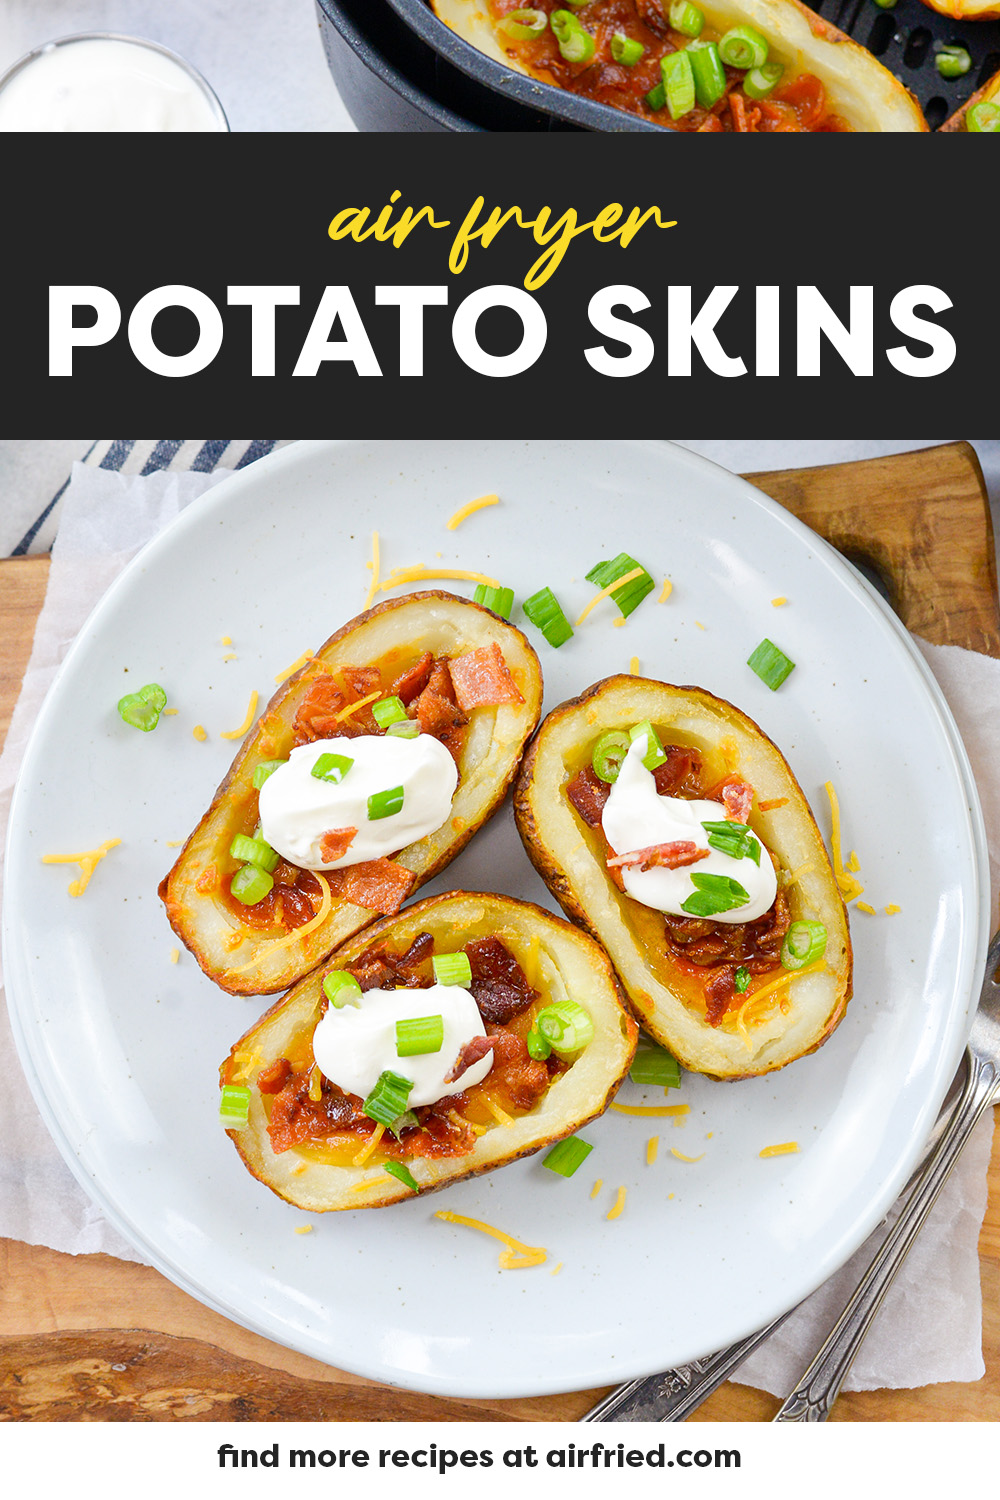 Our Air Fryer Potato Skins make an easy appetizer that friends and family love! Loaded with cheddar and bacon and topped with sour cream or ranch for the perfect snack!